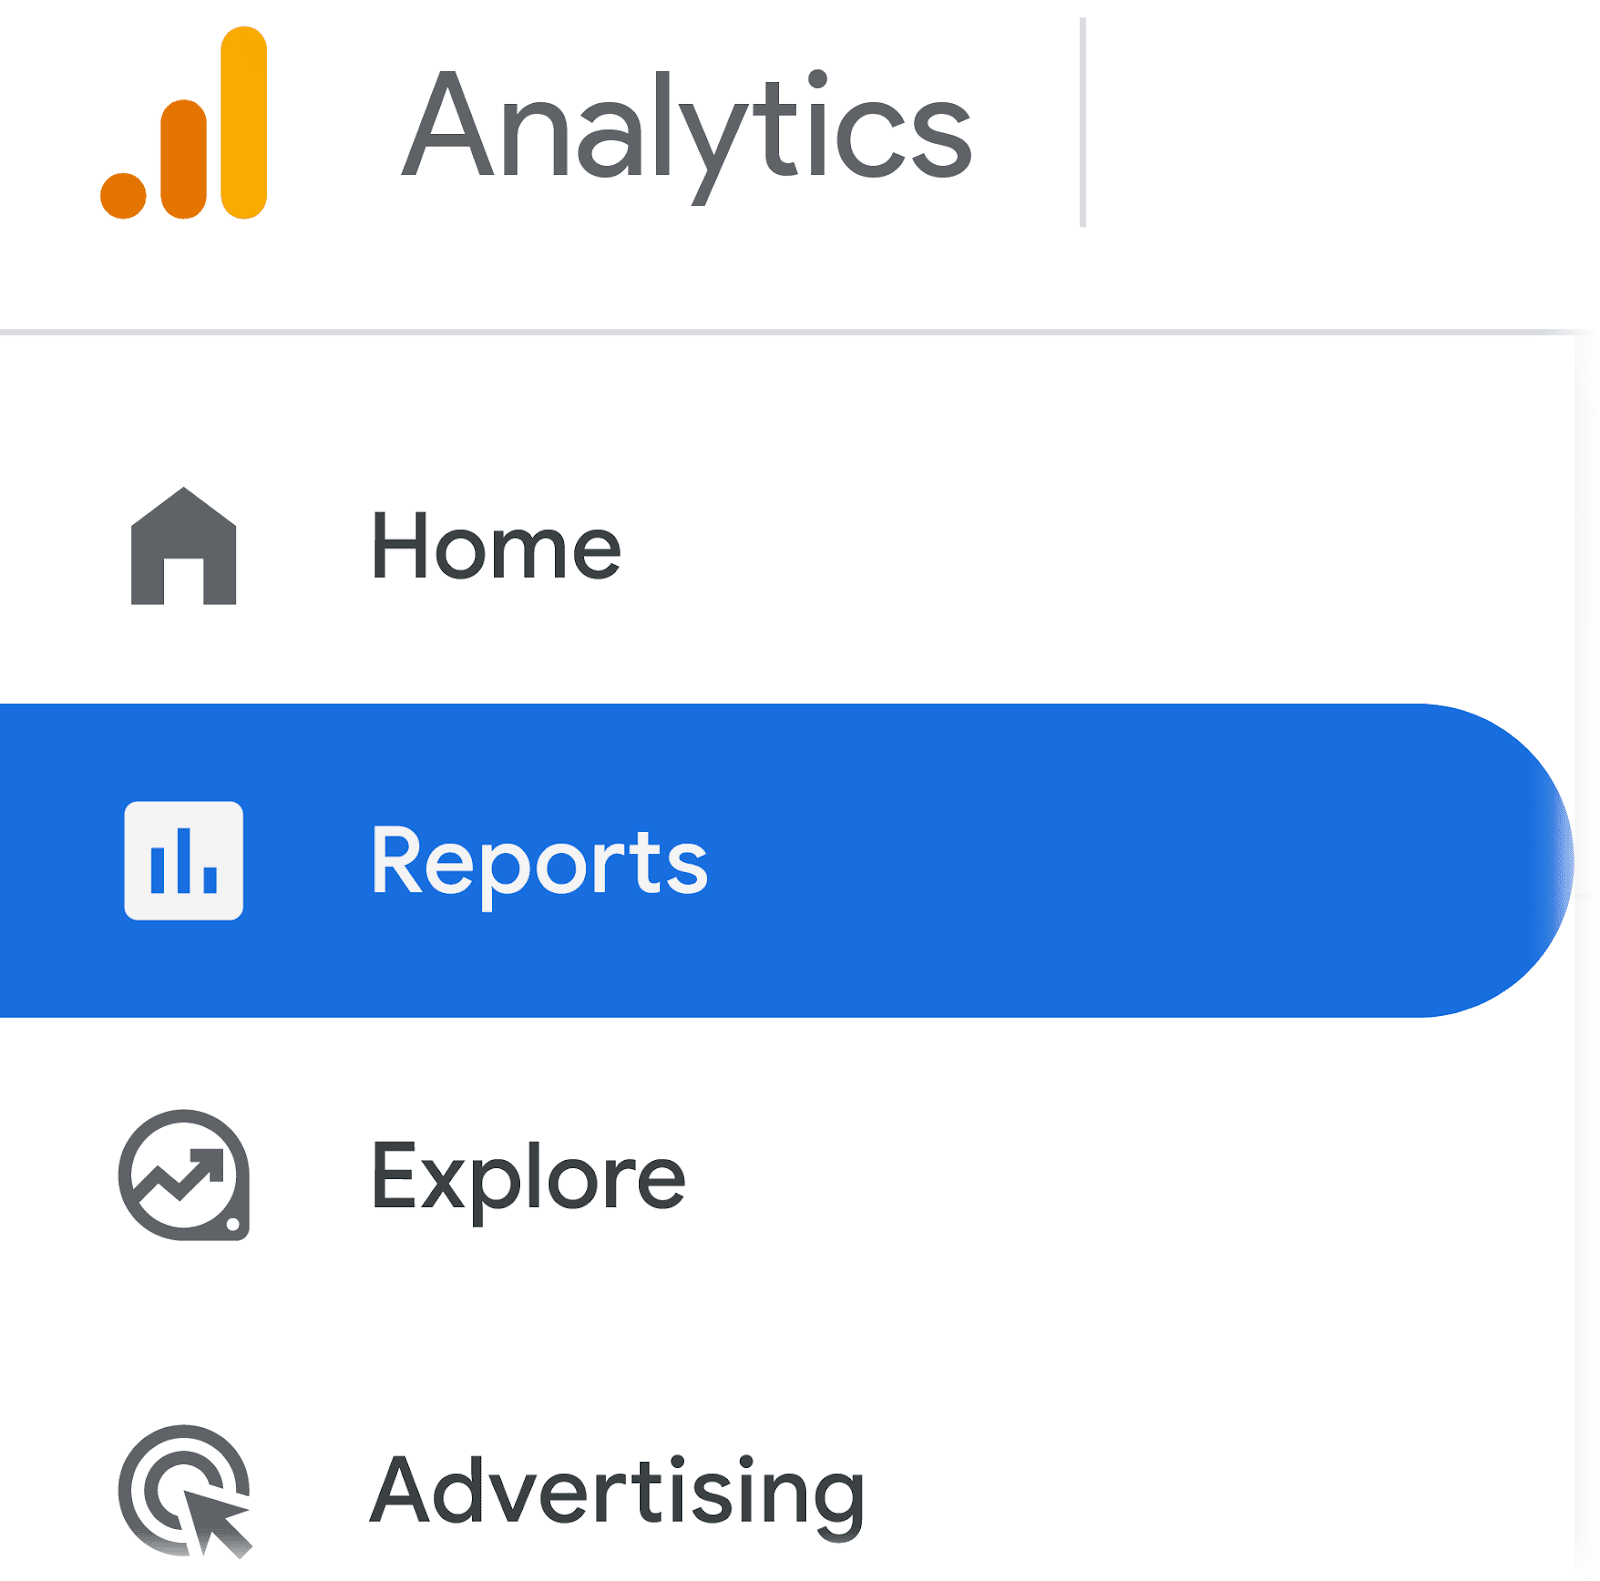 “Reports” selected from Google Analytics menu